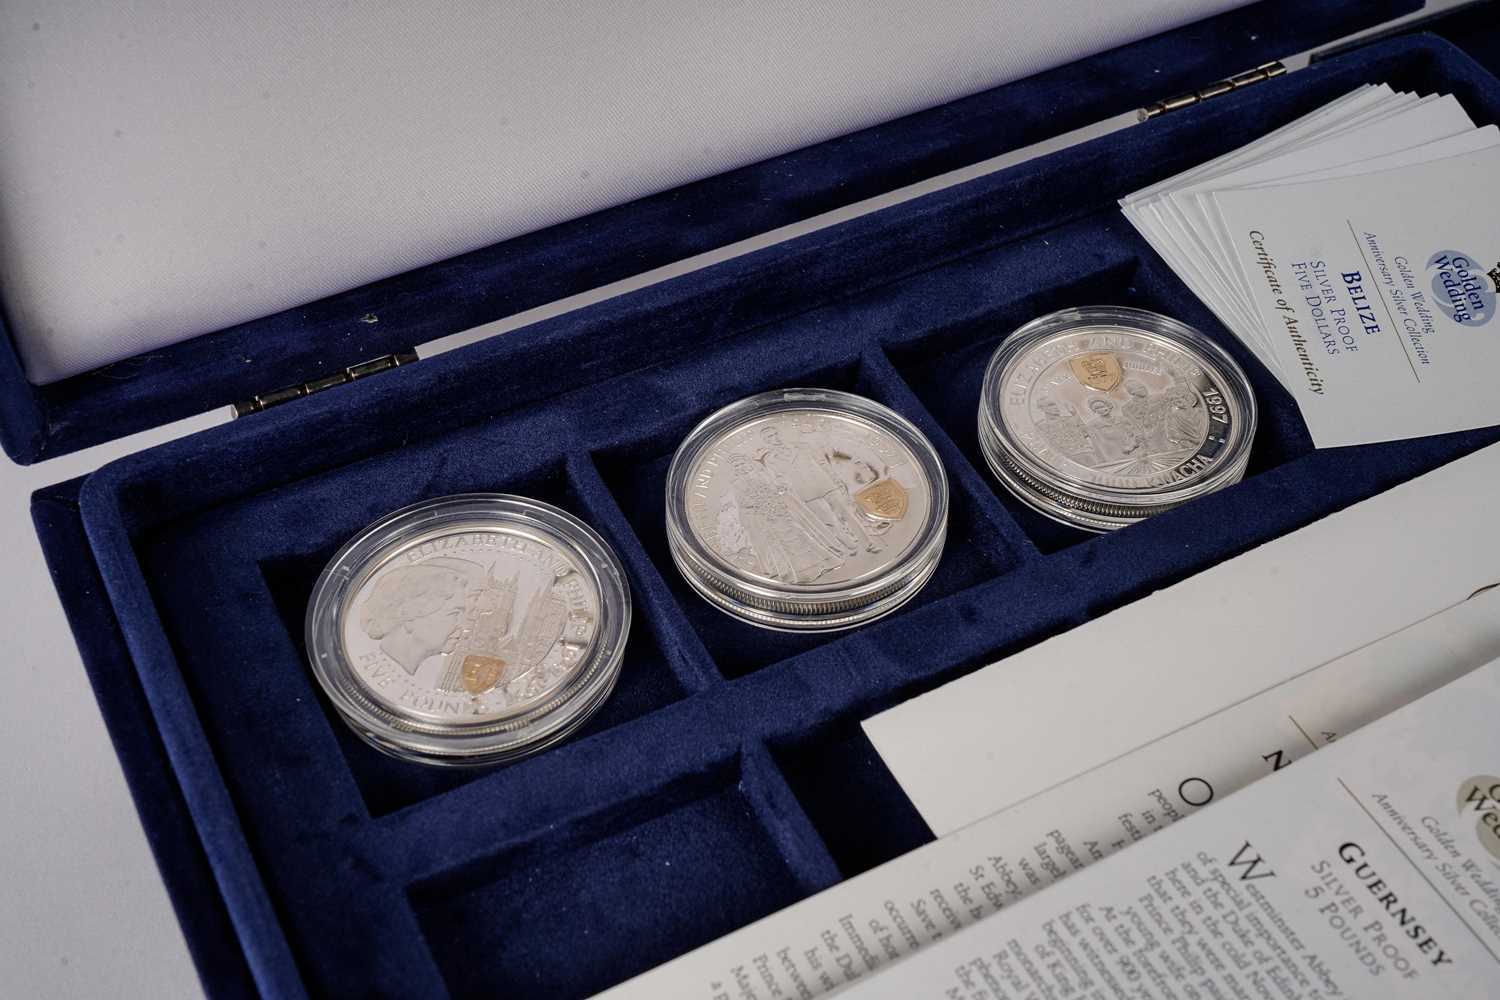 The Royal Mint Westminster Queen Elizabeth II The Golden Wedding Anniversary coin collection - Image 5 of 8